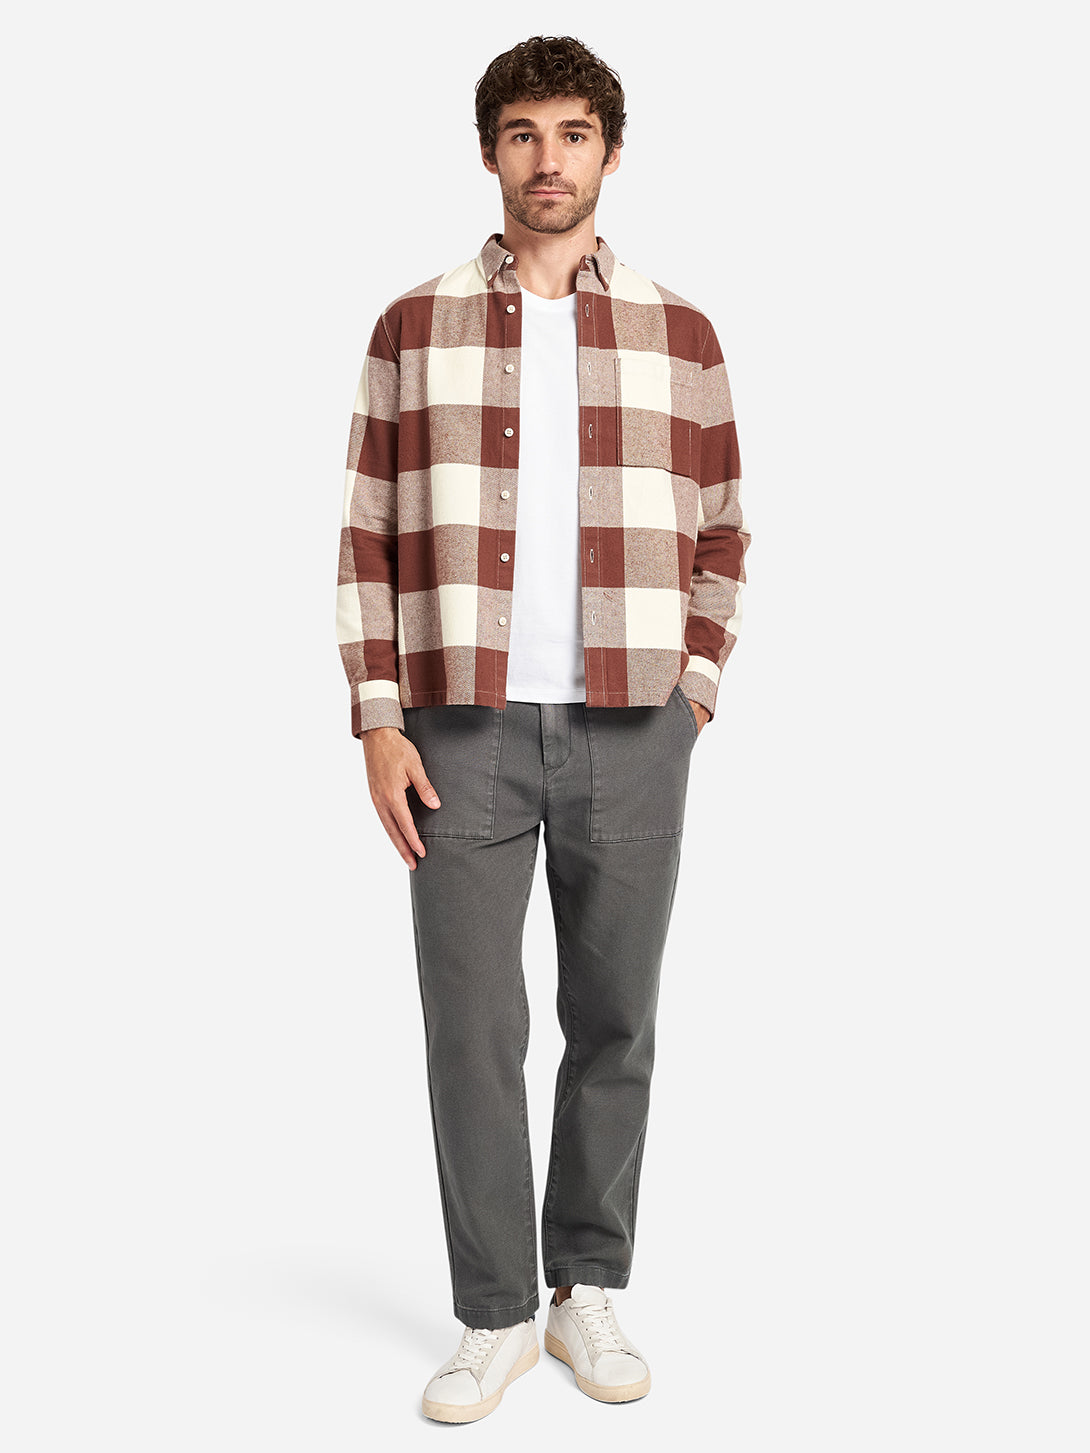 Brown/Off White Check Vance Checkered Flannel Shirt Men's ONS Button Up